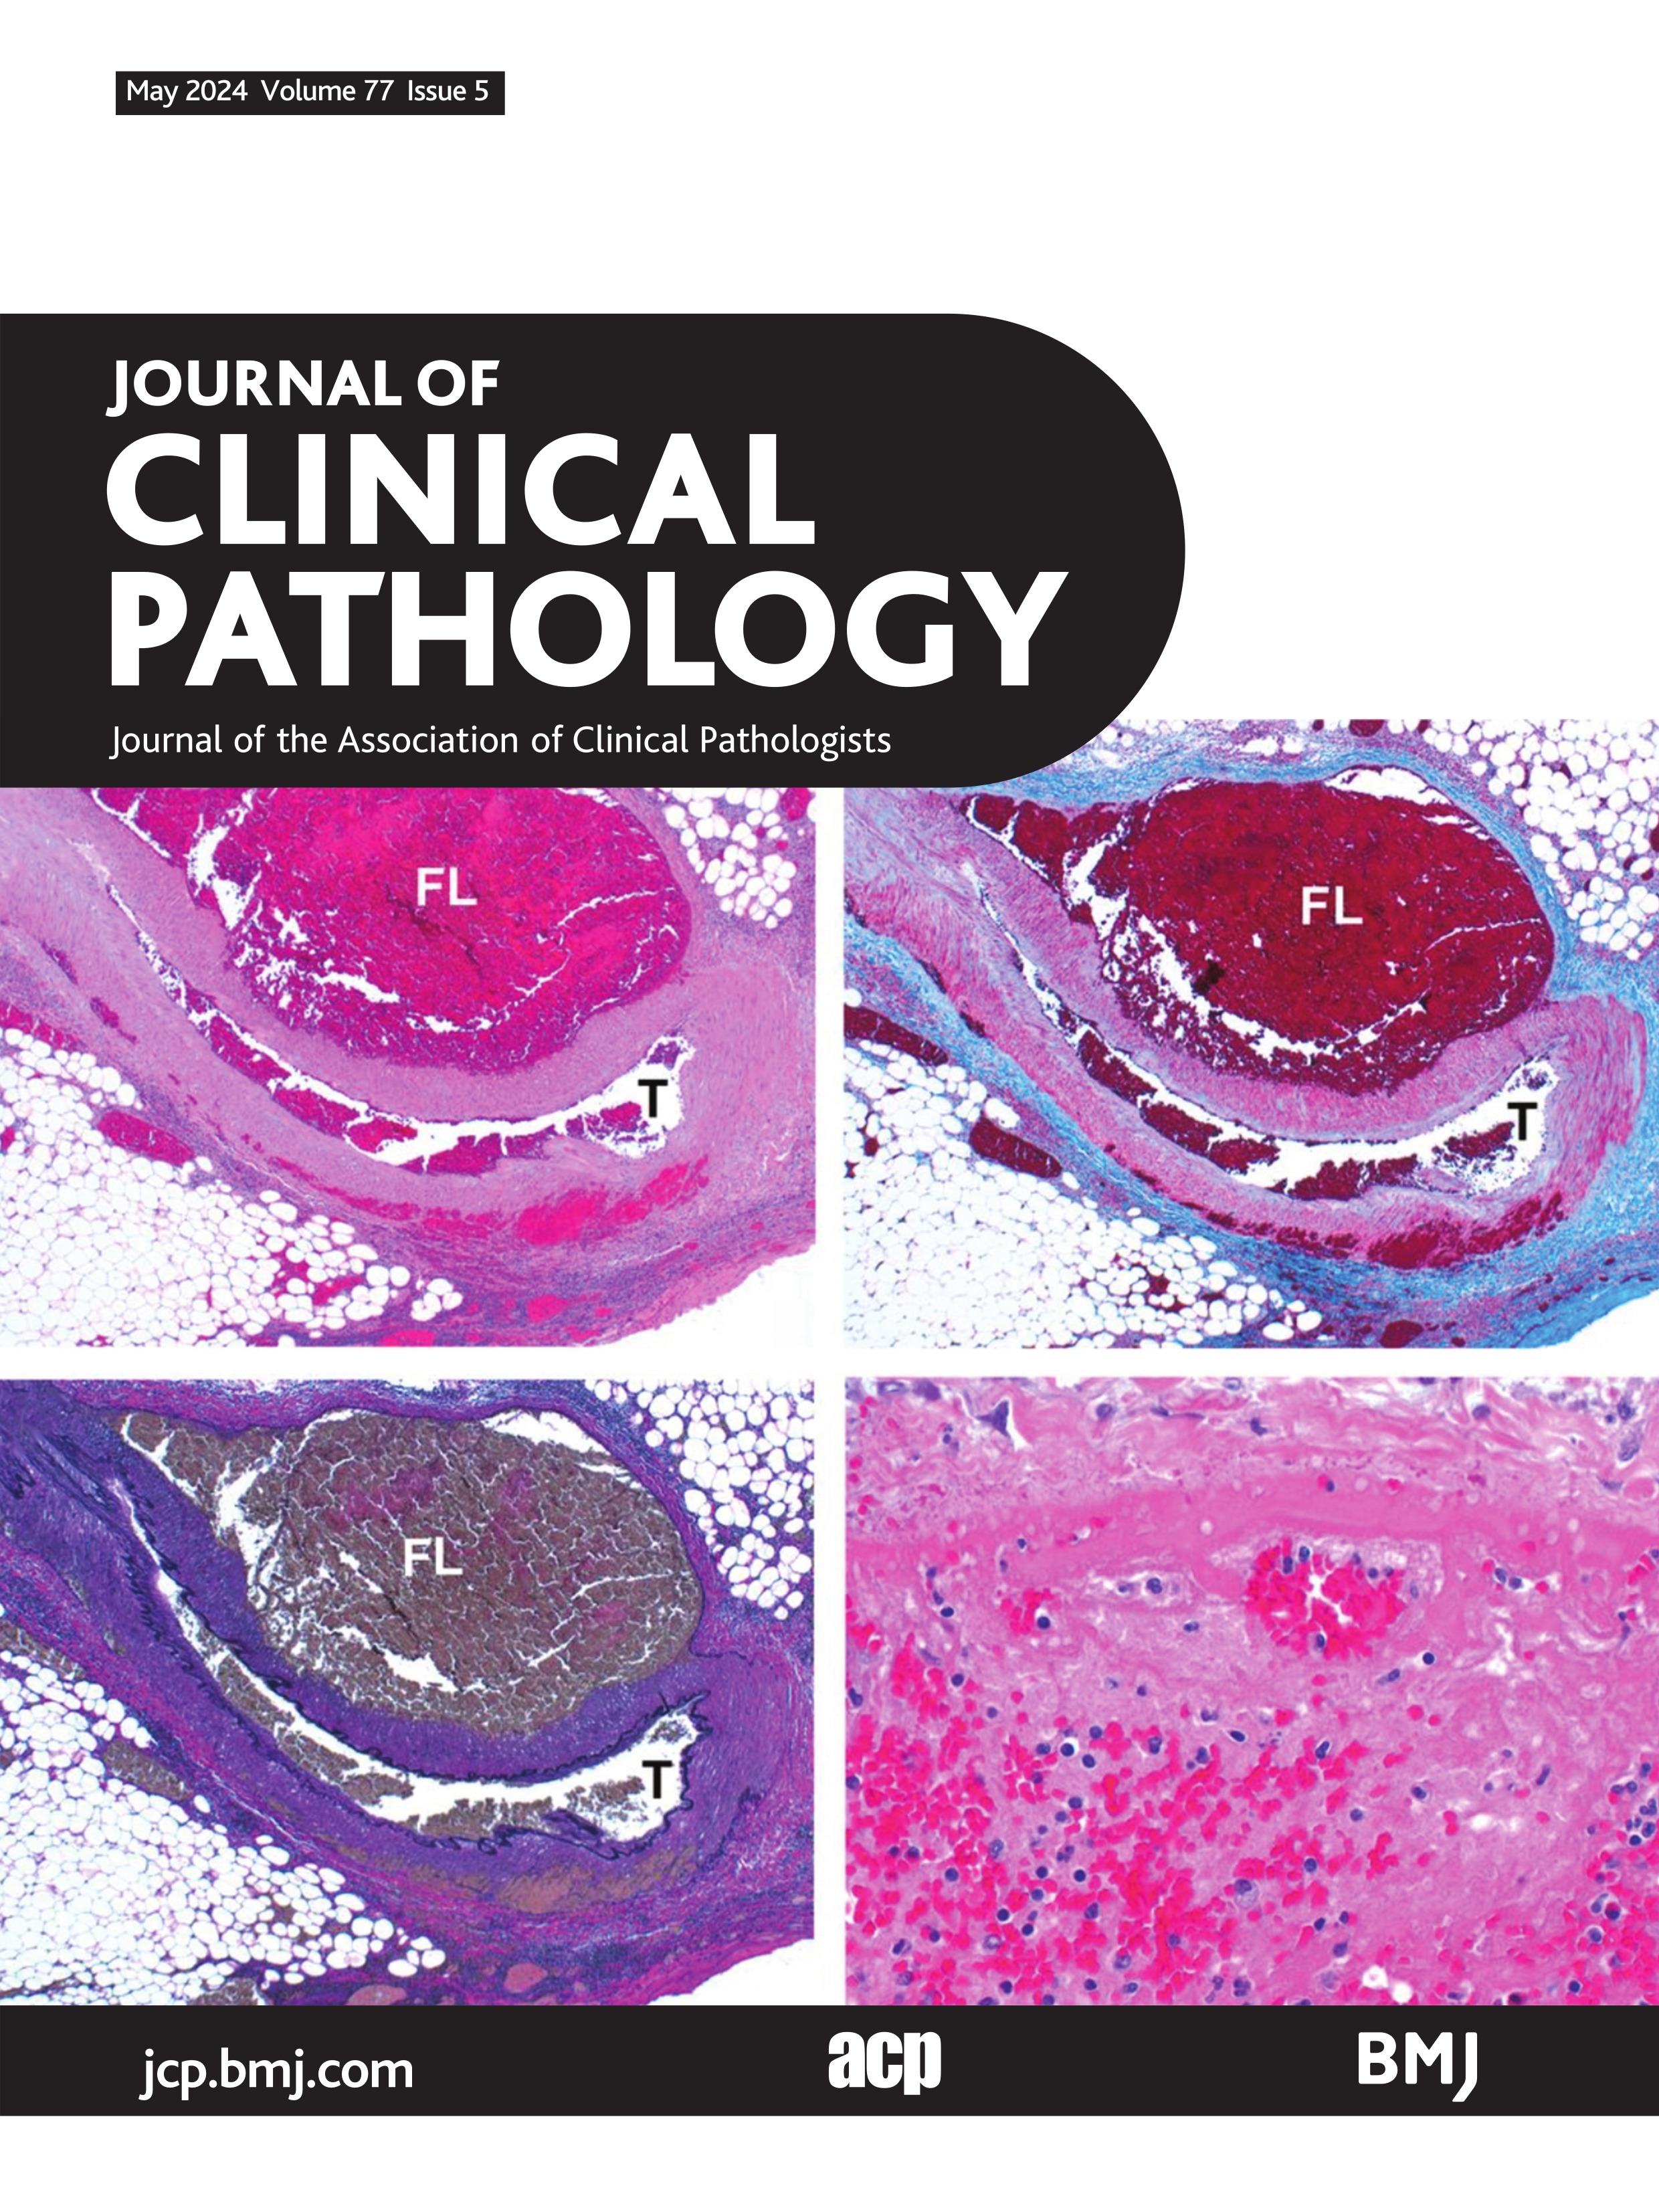 From Castleman disease histopathological features to idiopathic multicentric Castleman disease: a multiparametric approach to exclude potential iMCD histopathological mimickers